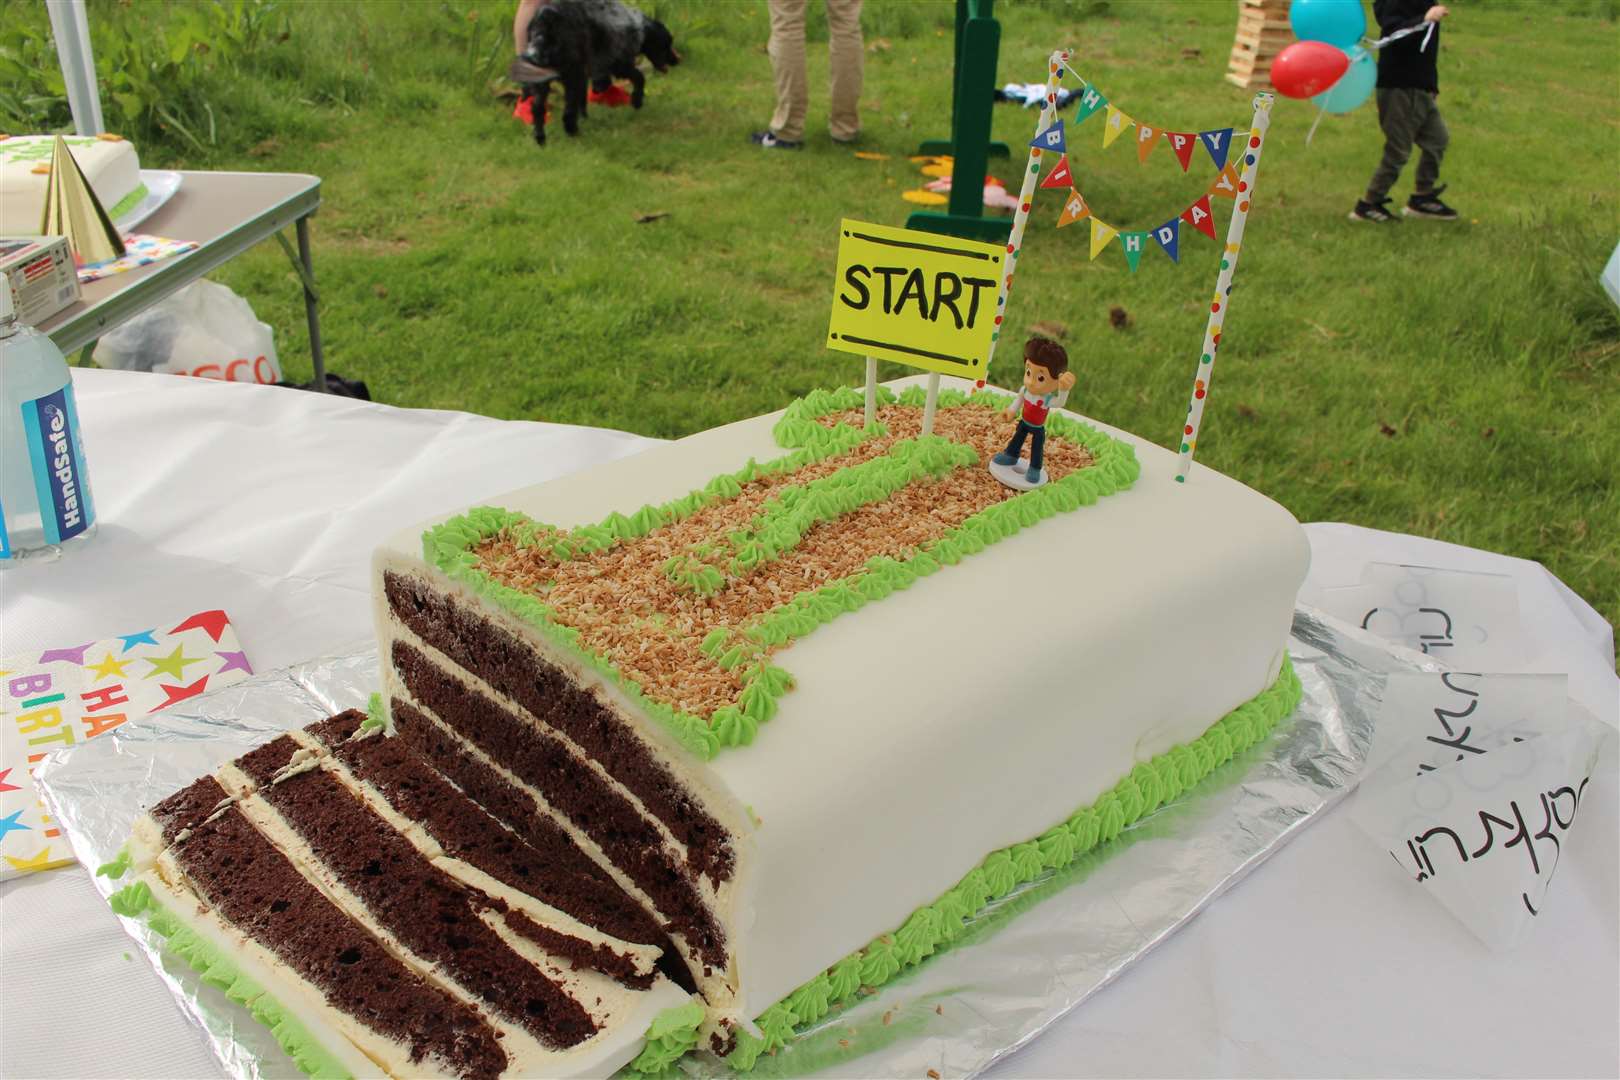 The birthday cake is cut to mark the first year of the Torvean junior parkrun.